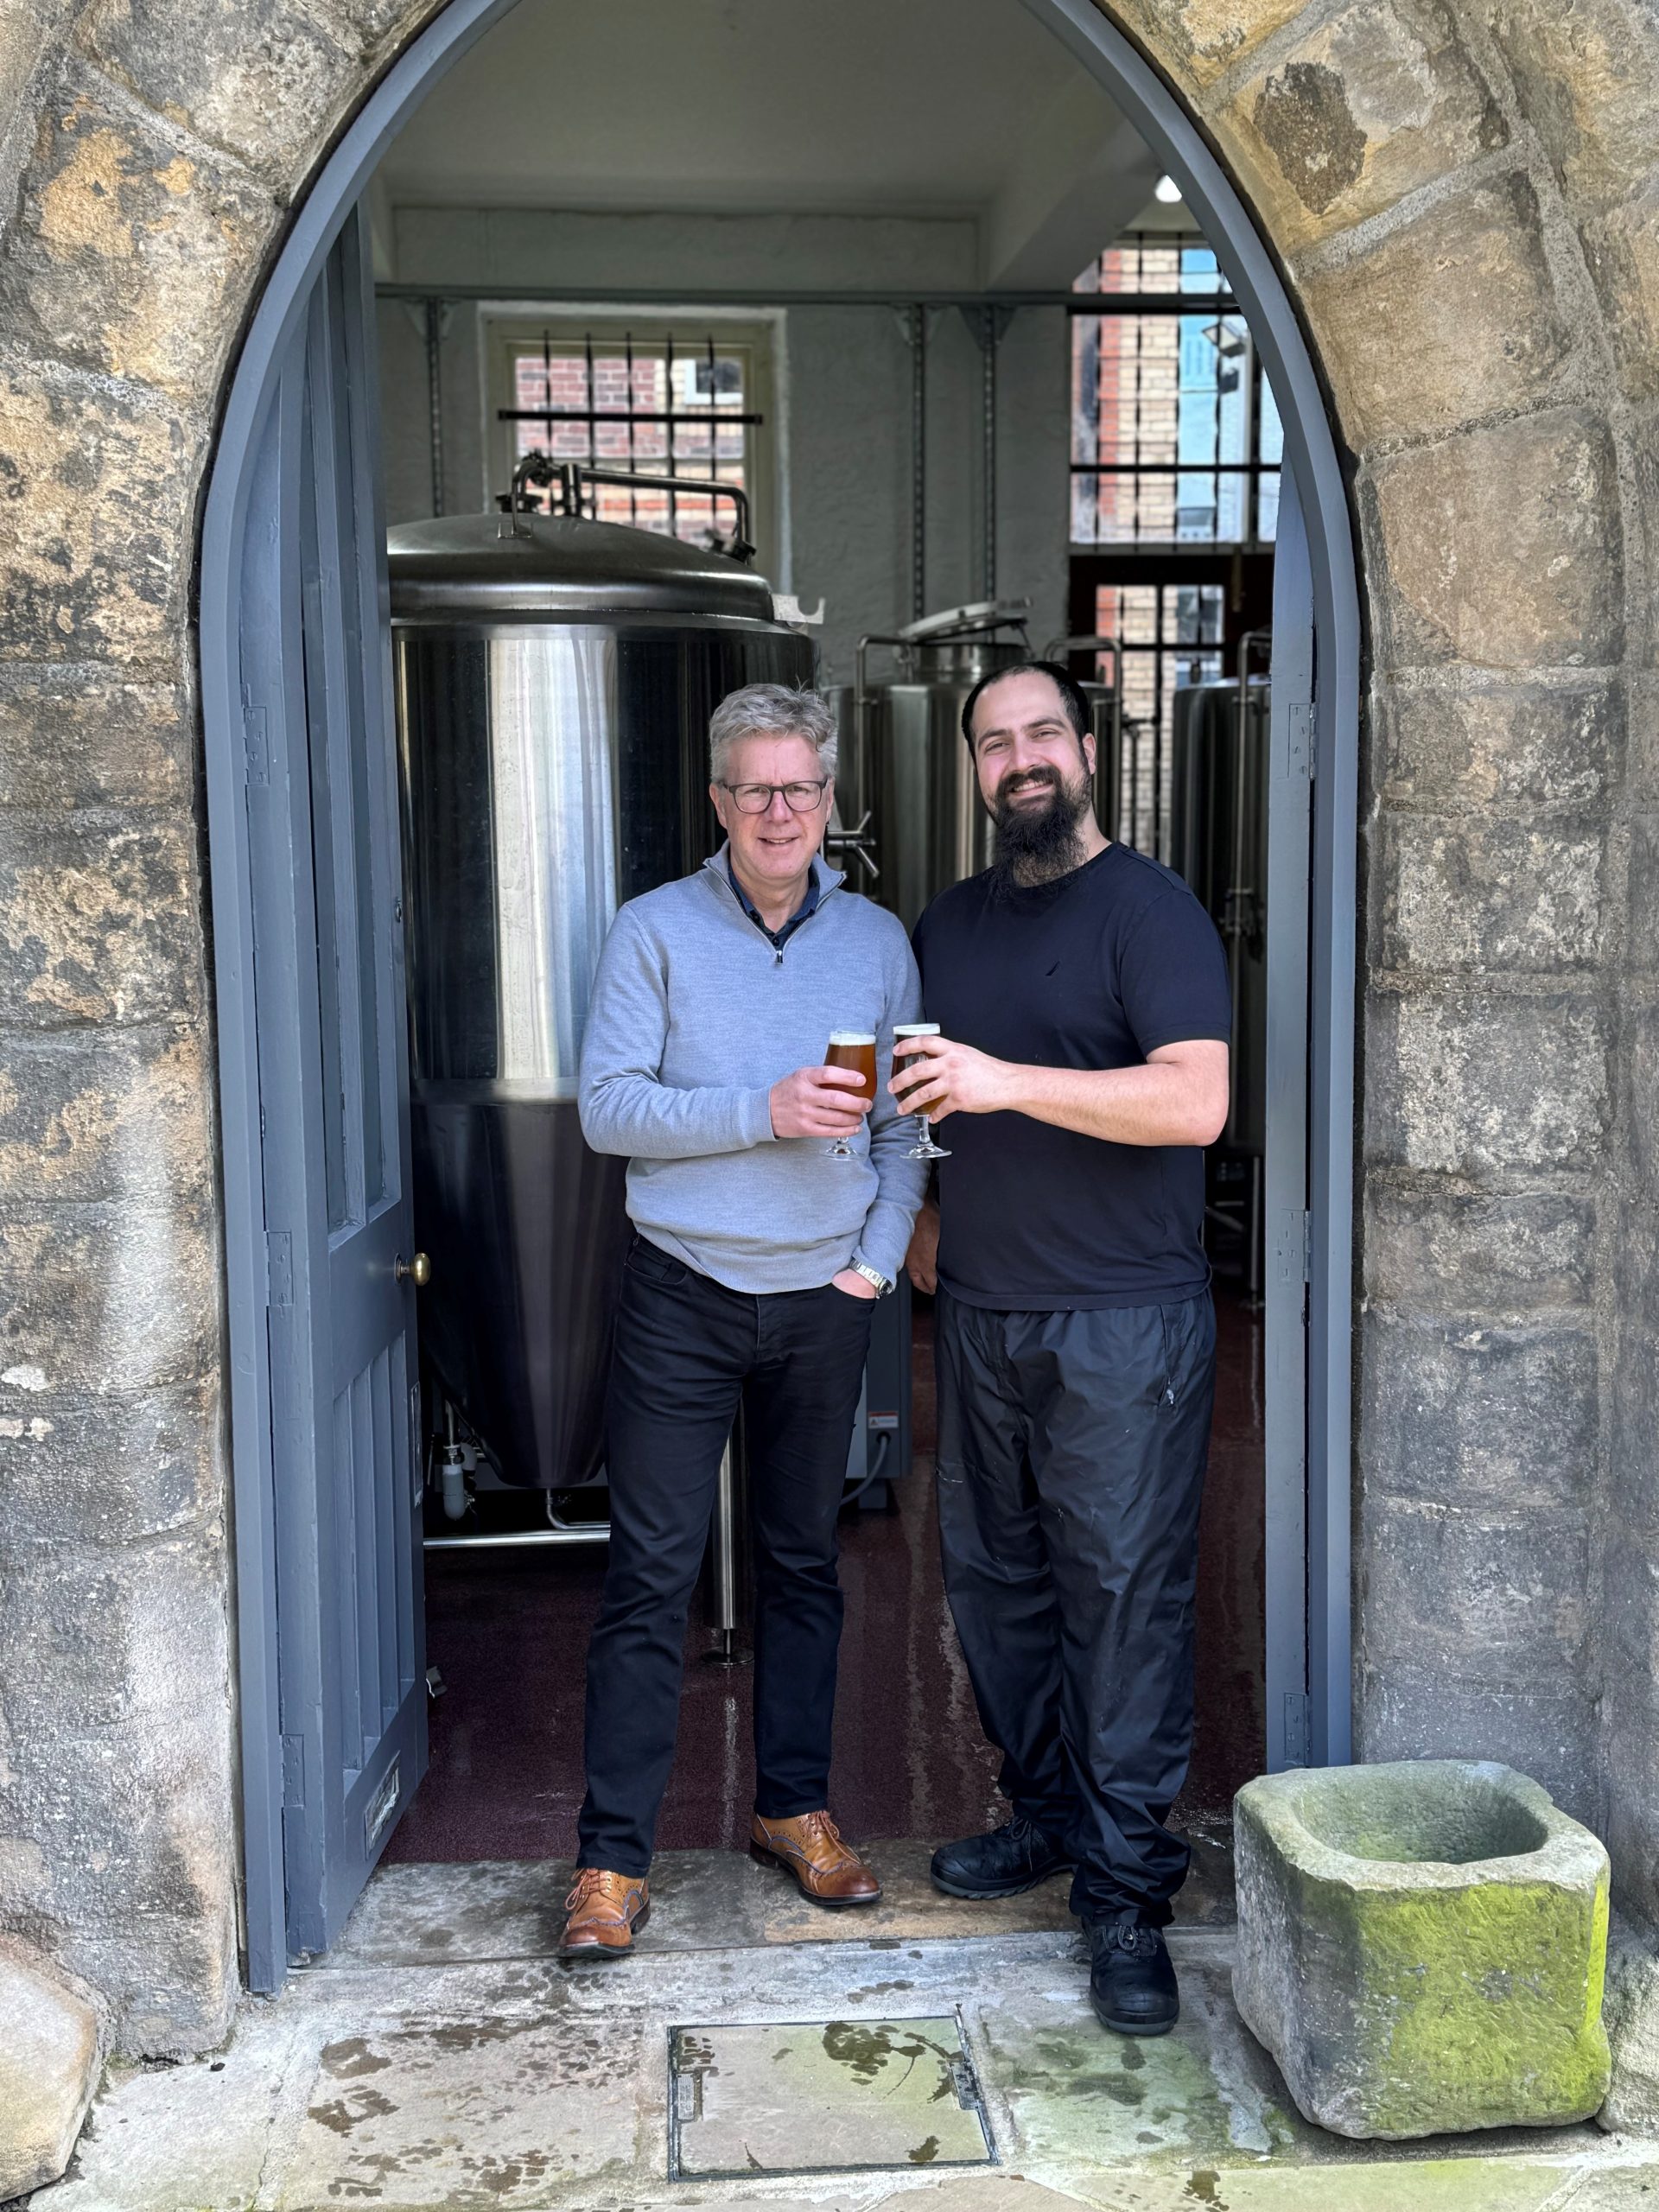 Andy Hook, owner, Blackfriars, with Ben Hall, head brewer of St Dominic's Brewery at Blackfriars, Newcastle